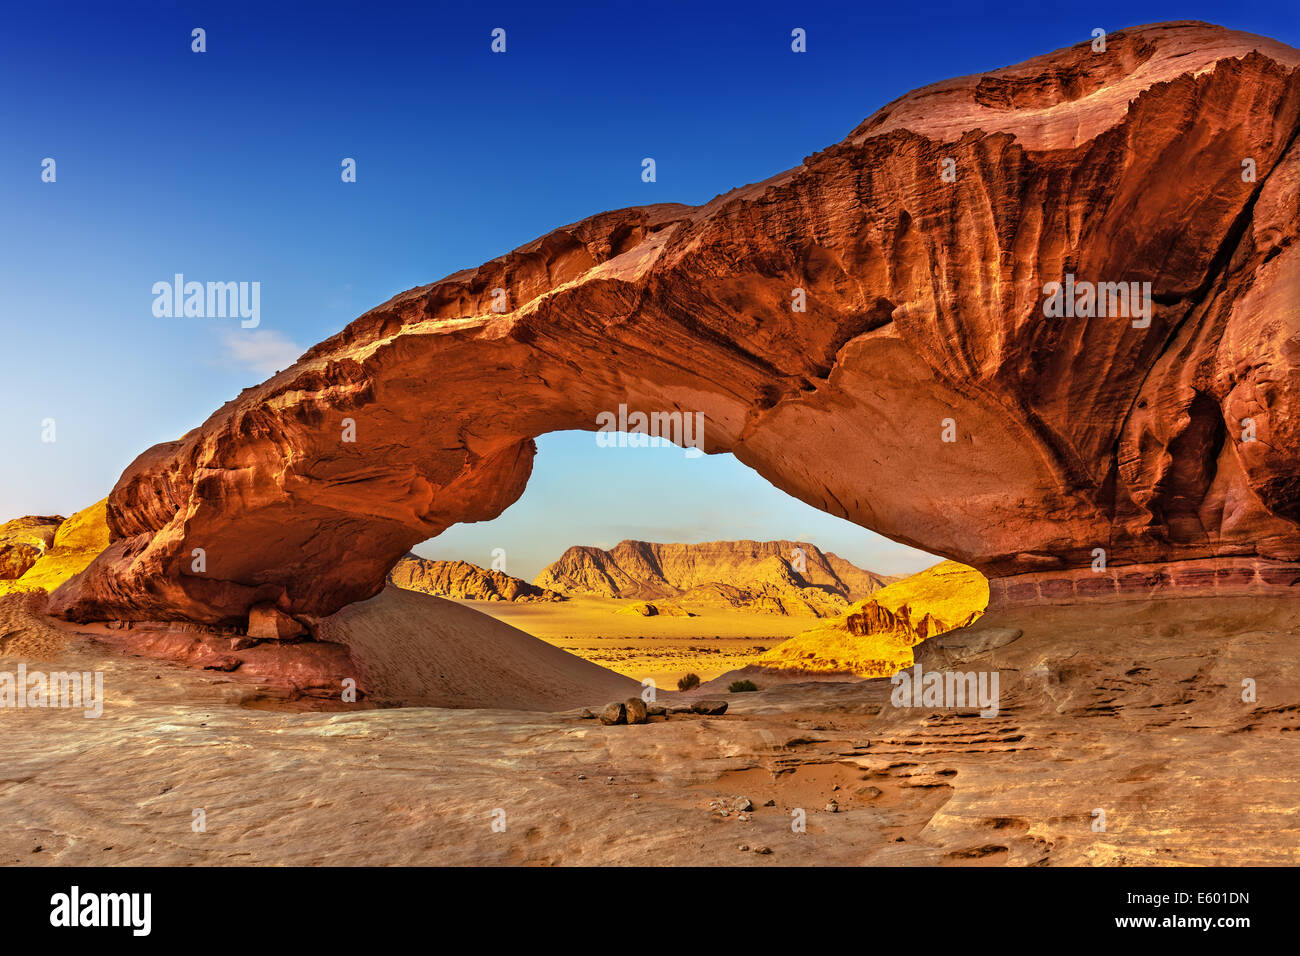 View through a rock arch in the desert of Wadi Rum, Jordan, Middle East Stock Photo